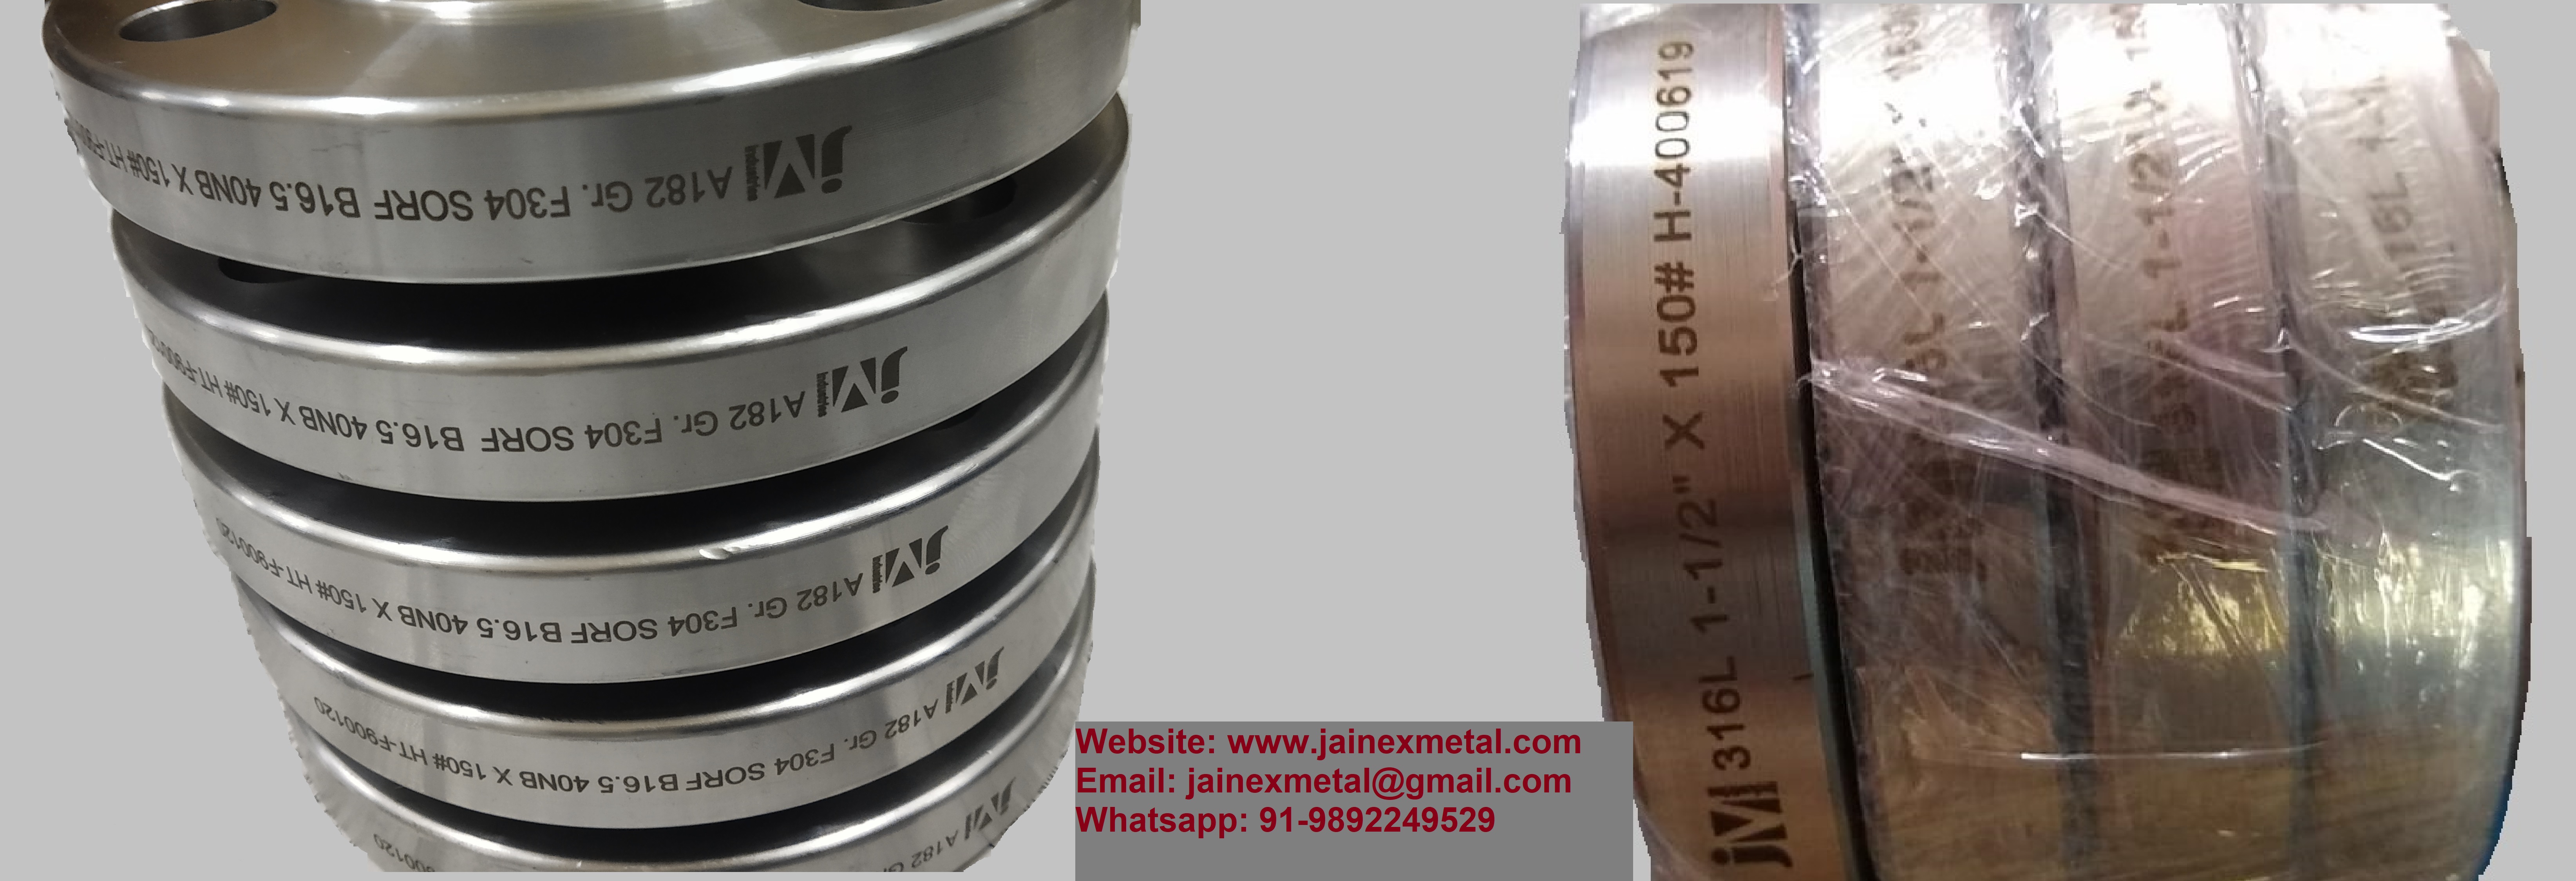 STAINLESS STEEL FLANGES
#flanges #stainlesssteelflanges #manufacturer #exporters #a182 #forgedfla